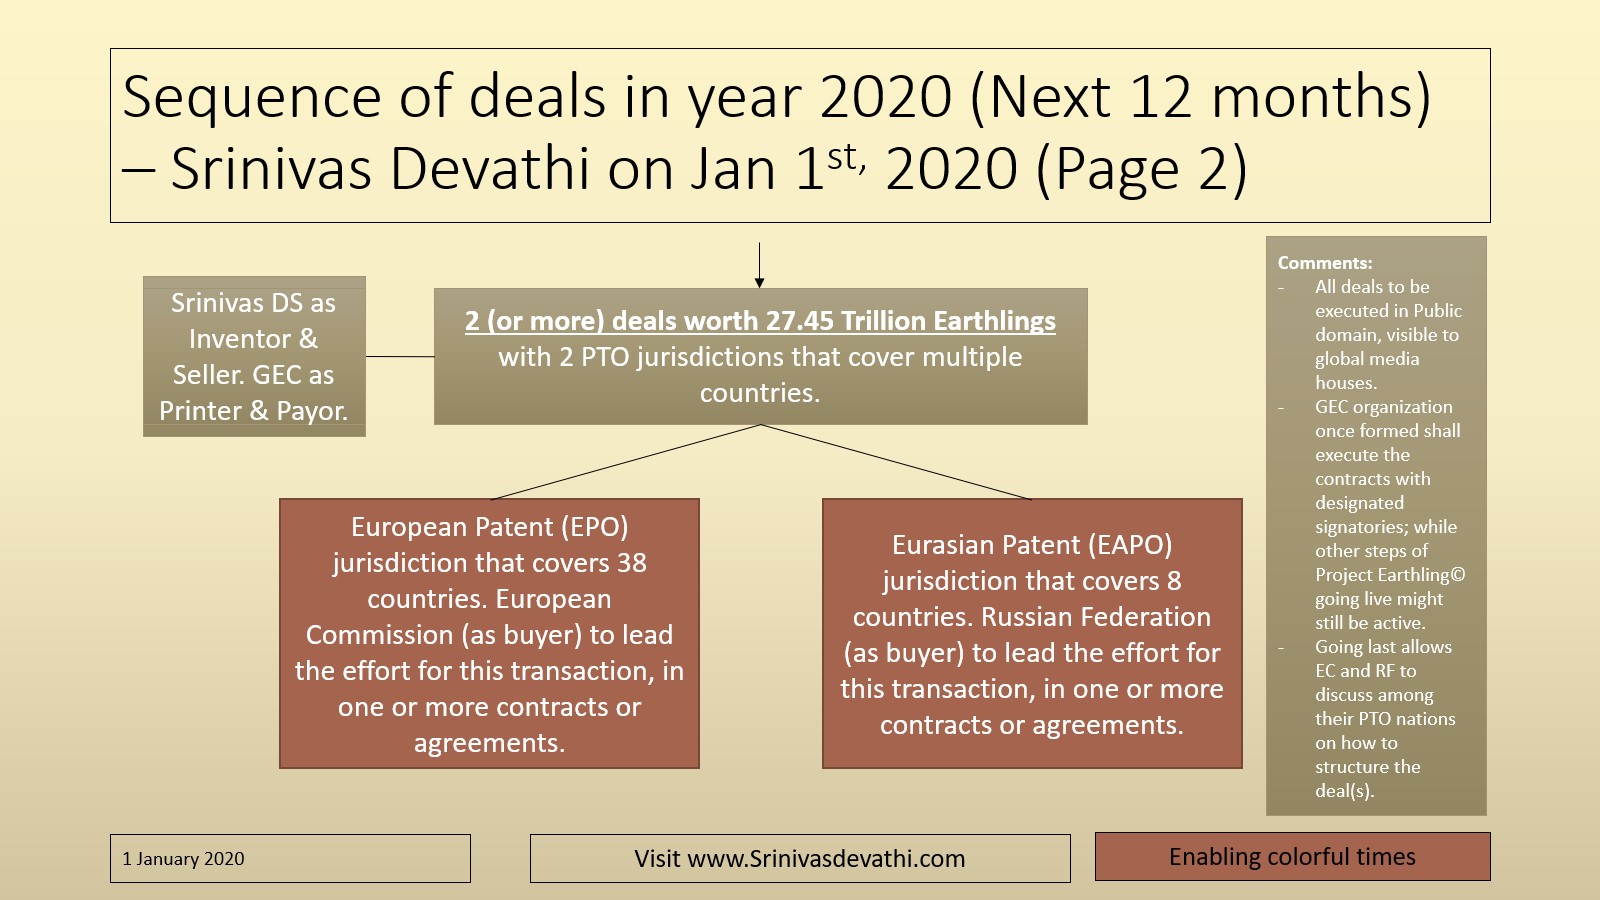 Sequence of deals - Page 2